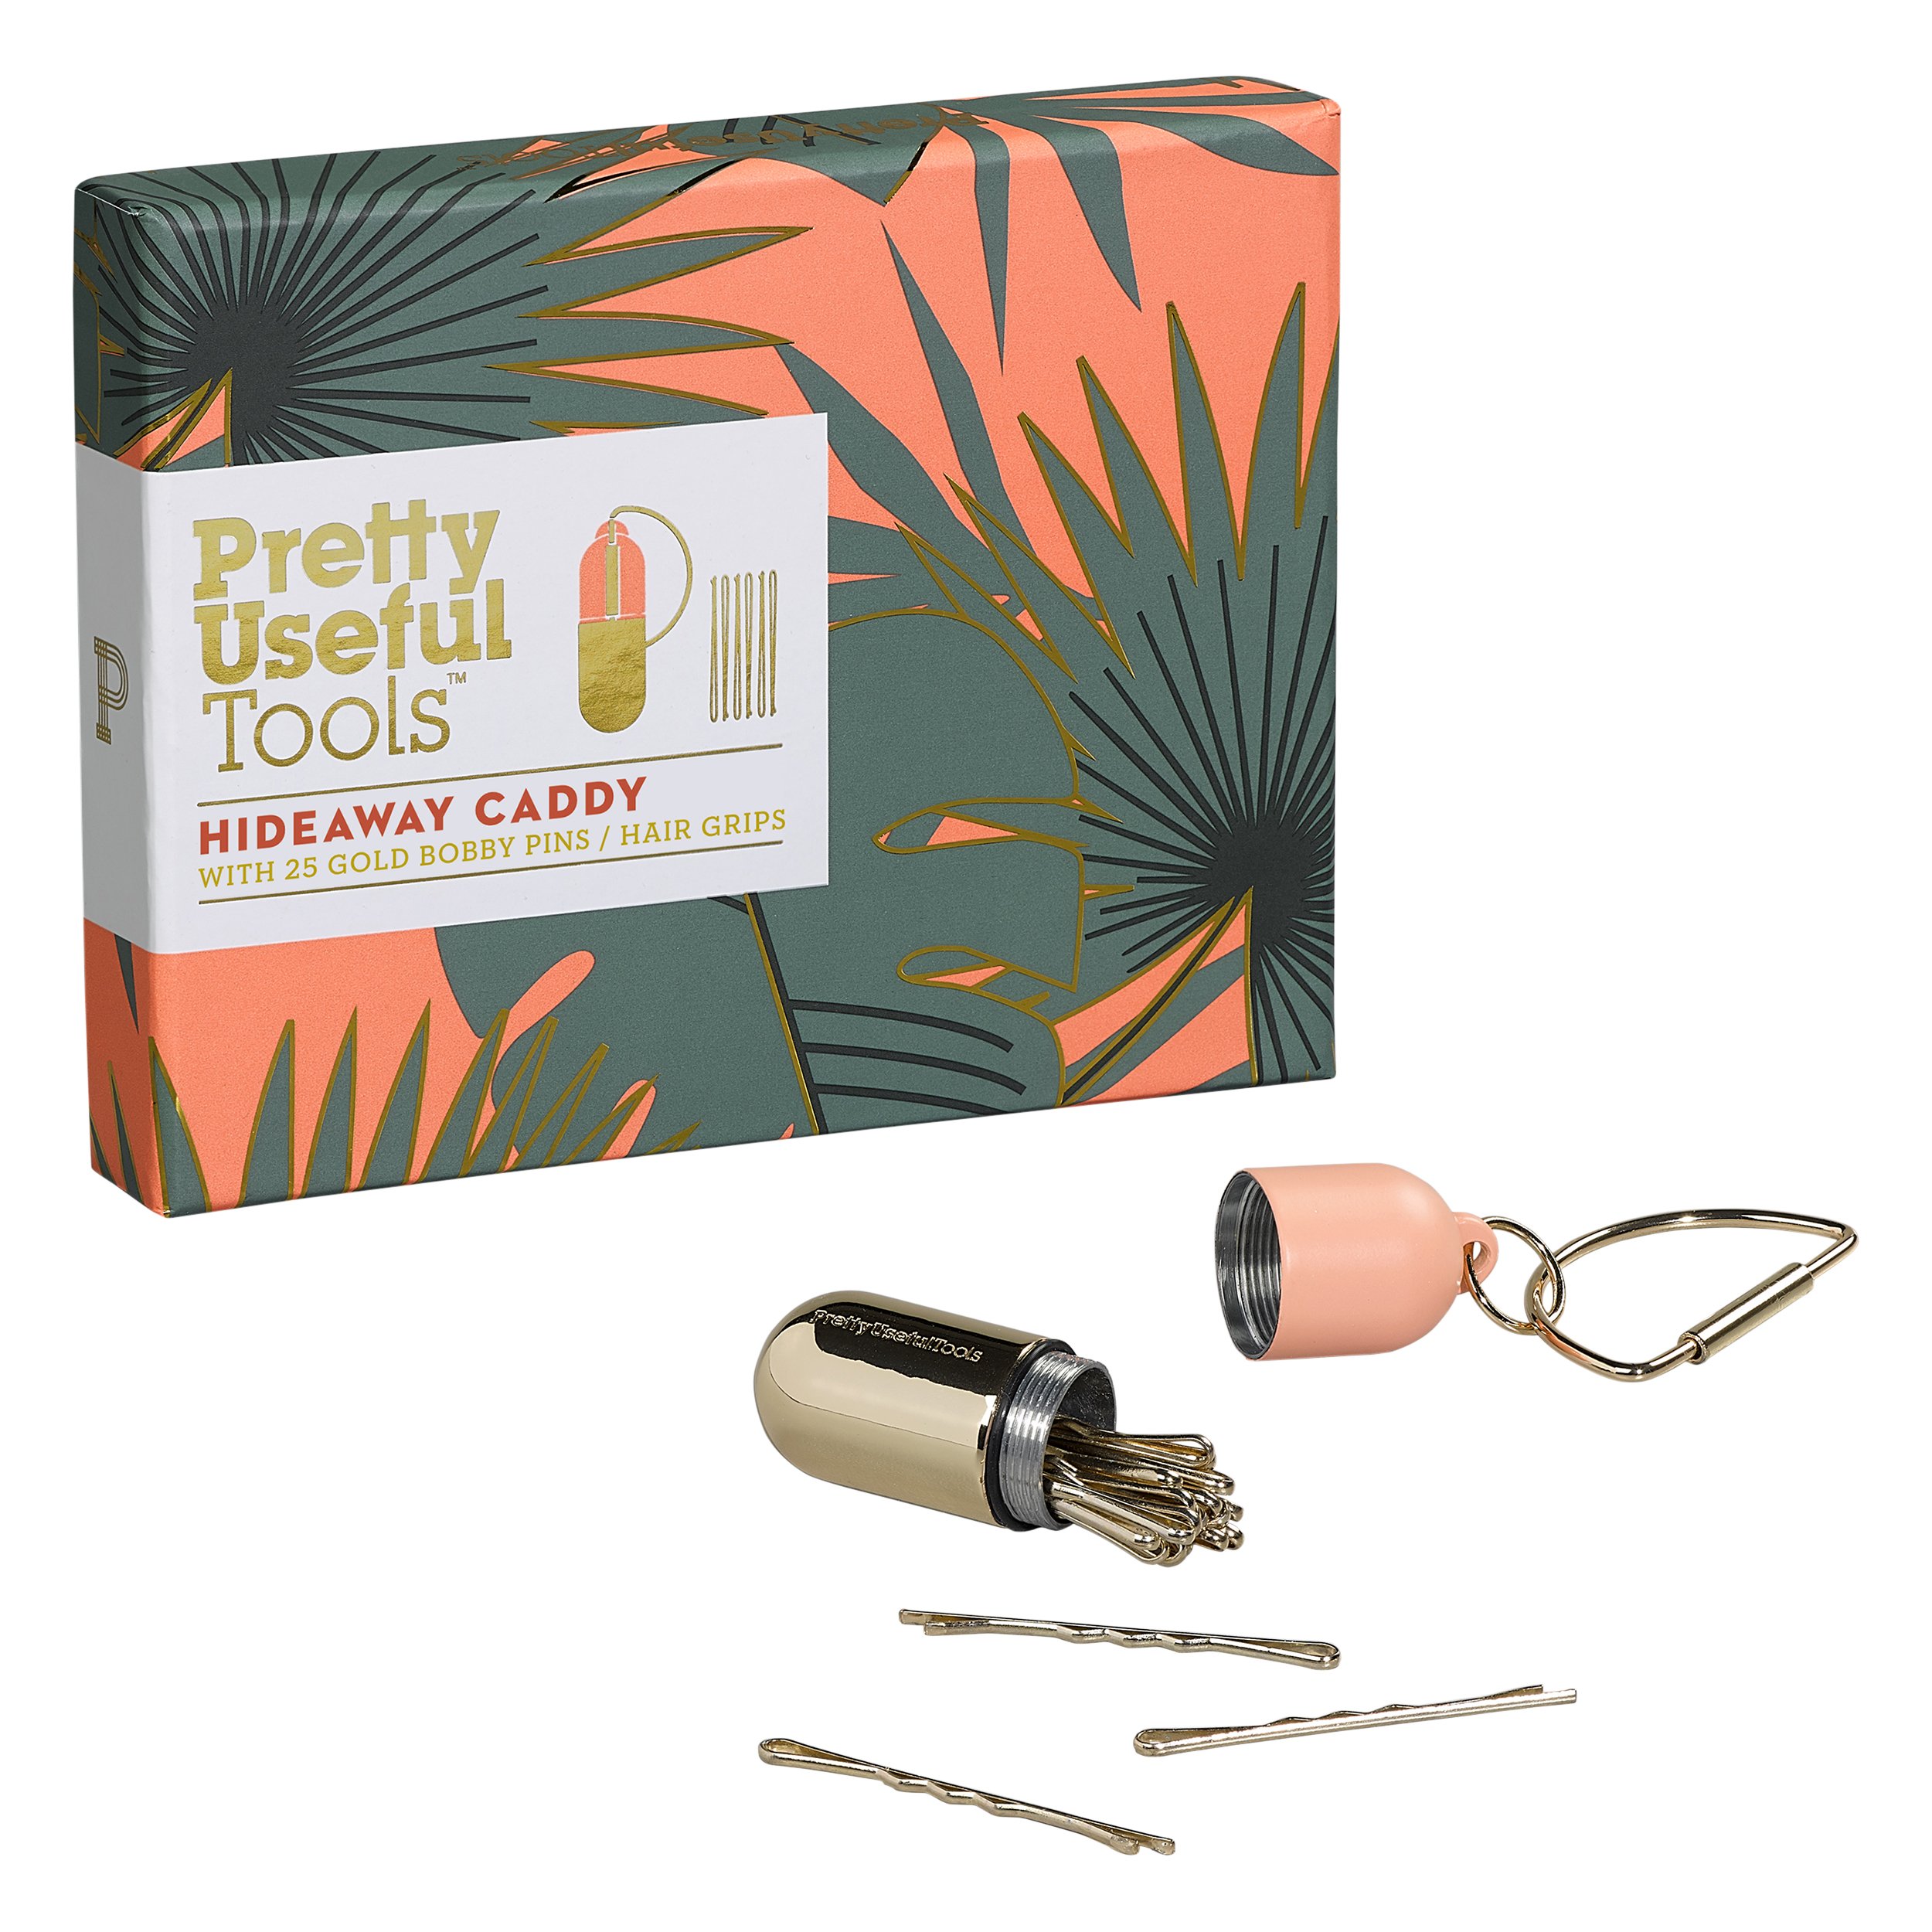 Pretty Useful Tools Hair Pin Hideaway Caddy With Handy Carabiner Bag Connector